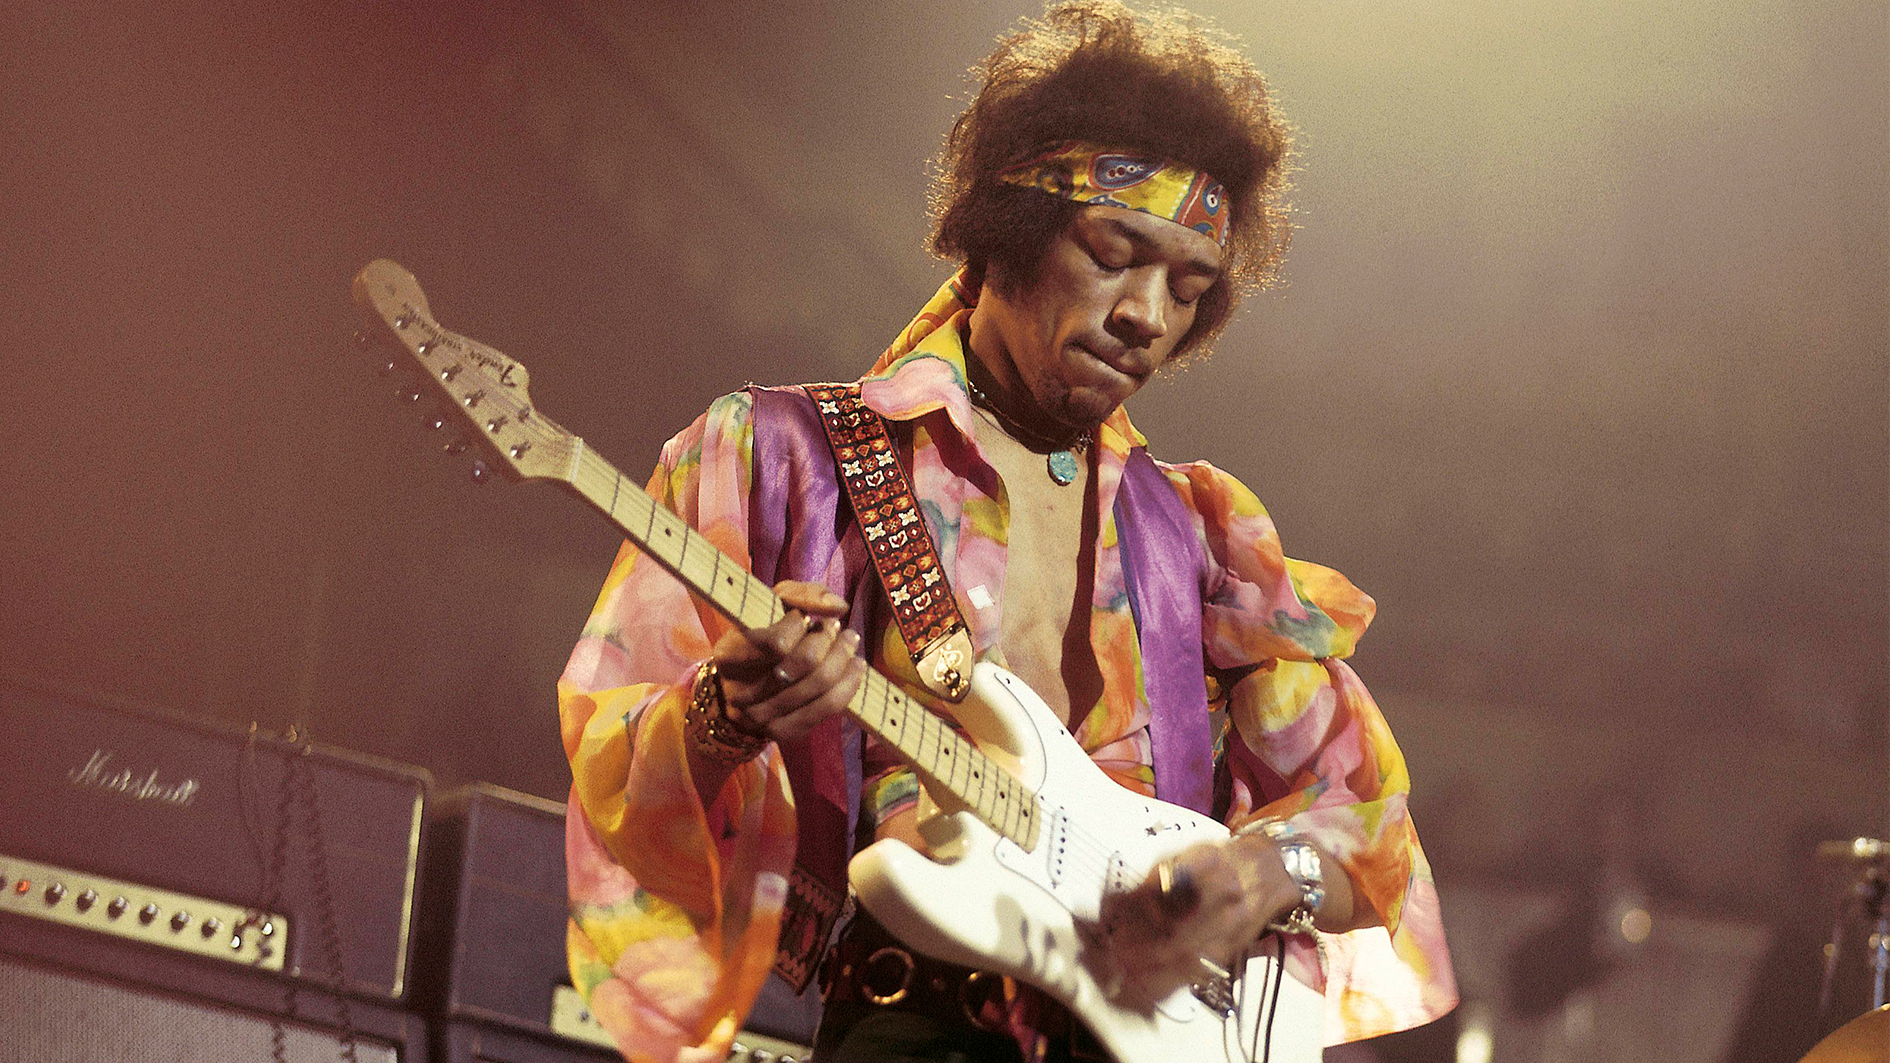 Guitarist Jimi Hendrix performing with an electric guitar.